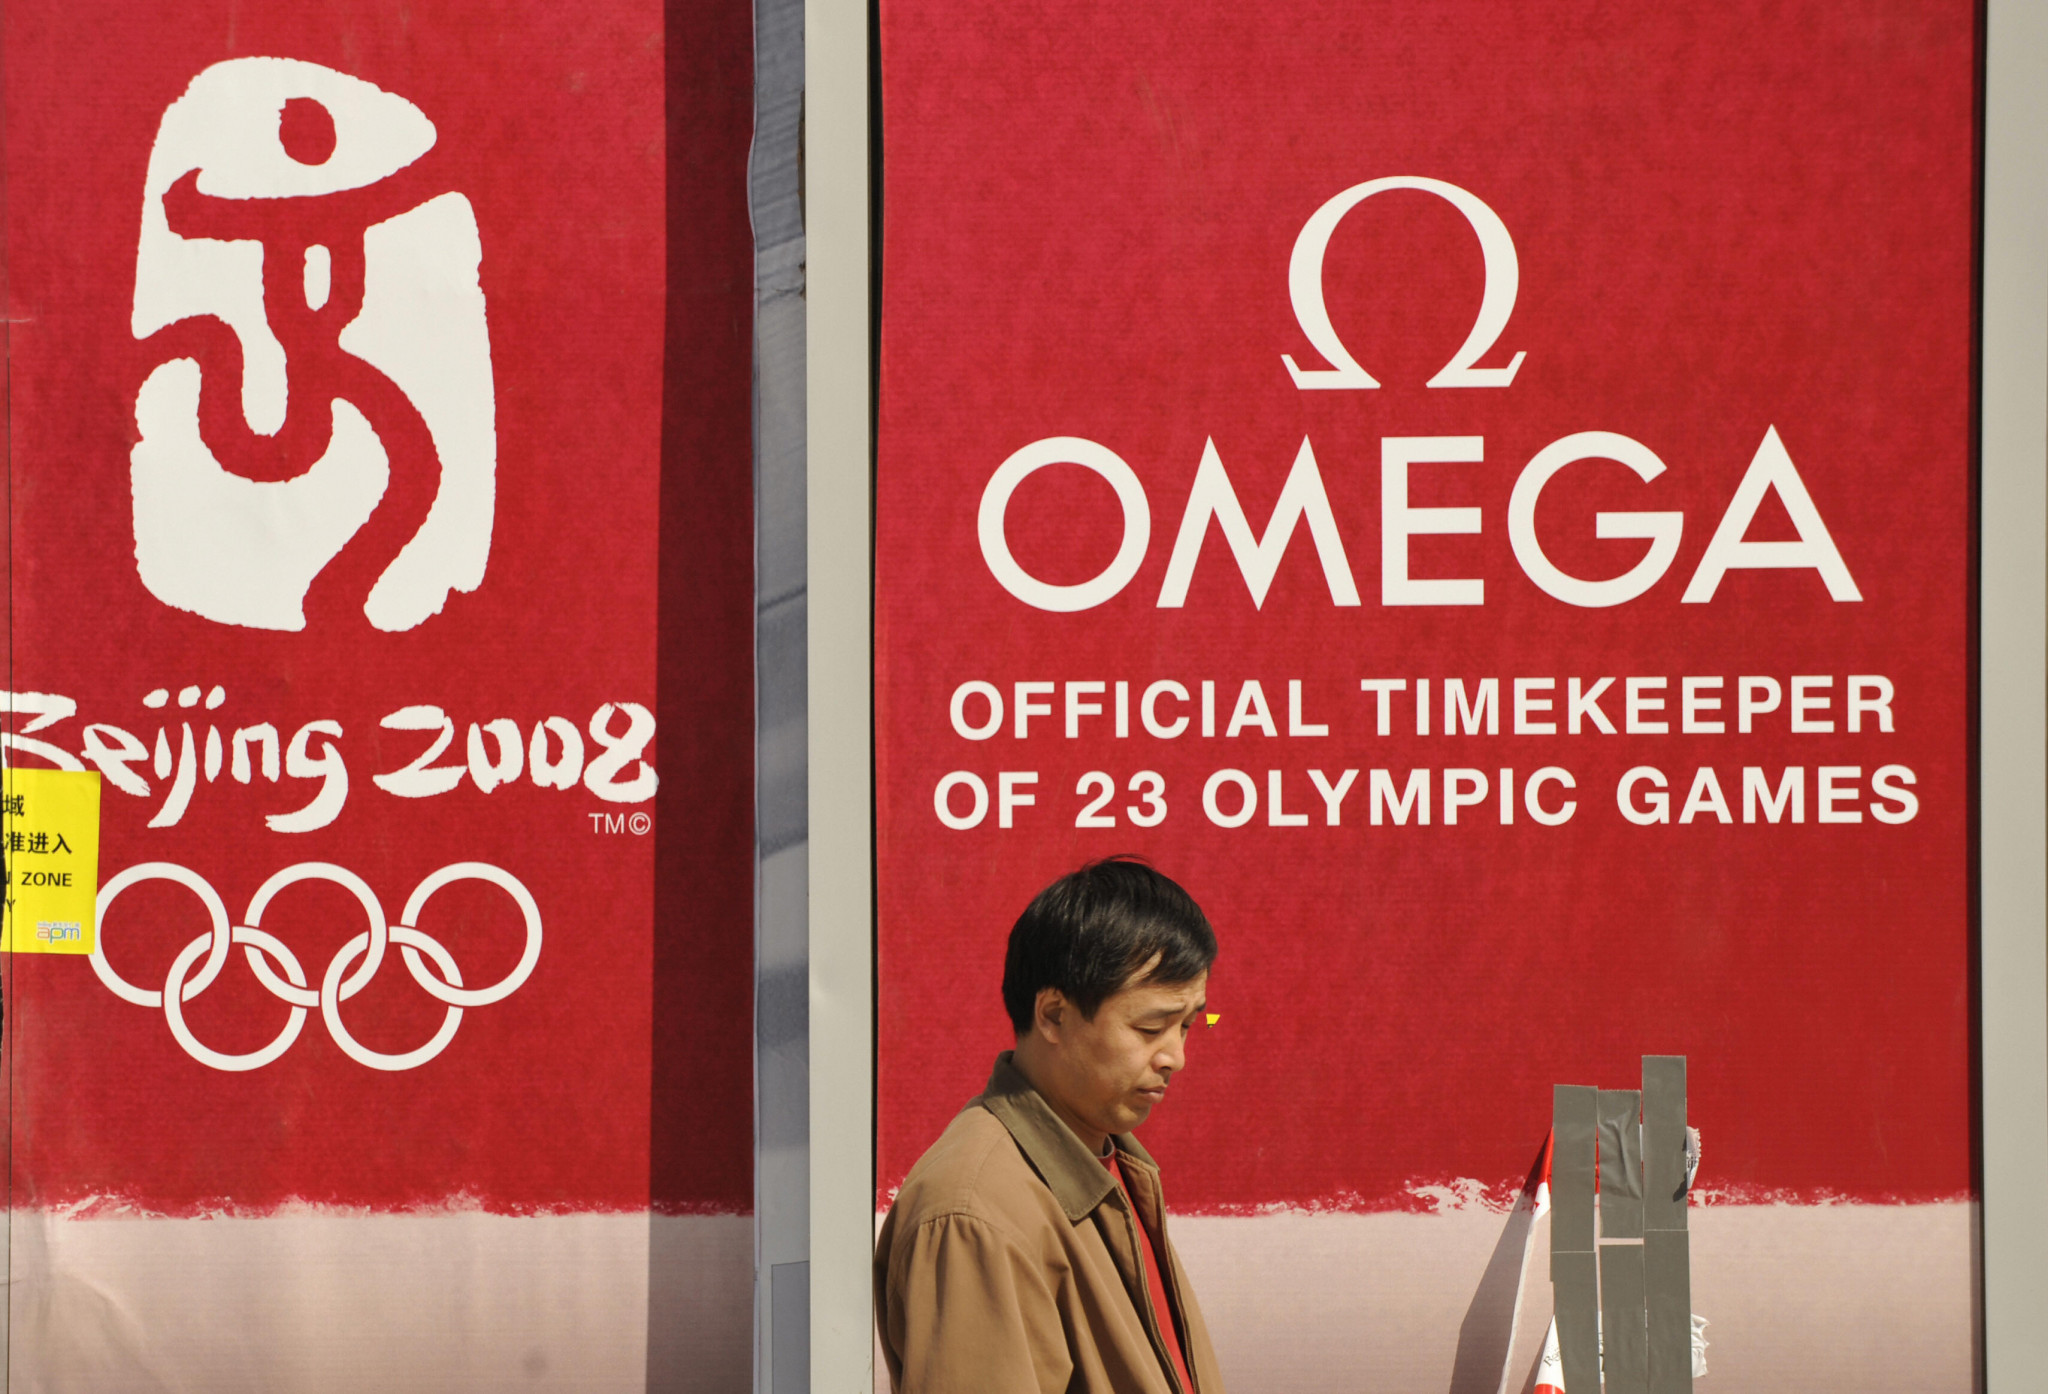 Omega has now been the official timekeeper of 28 Olympic Games ©Getty Images